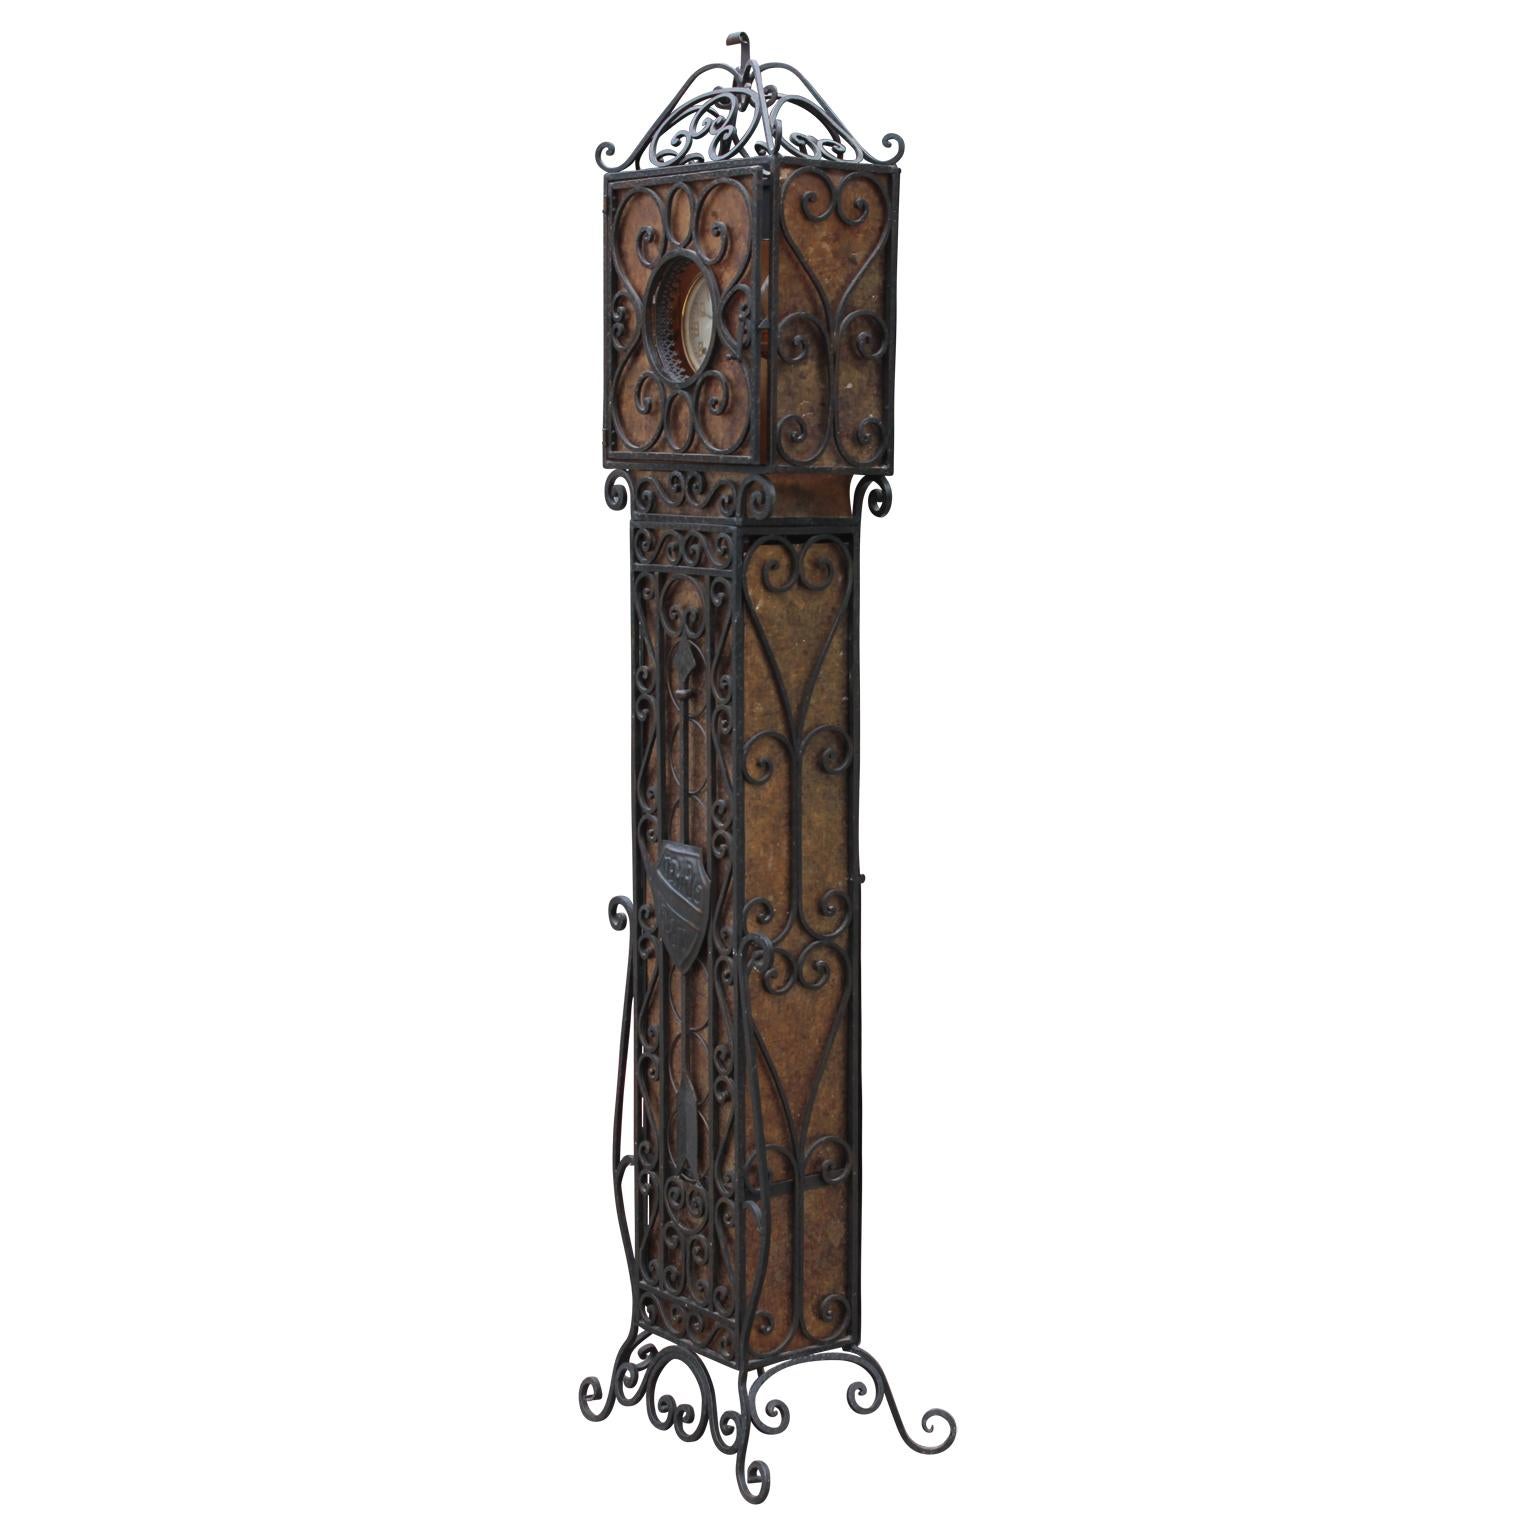 A beautiful crafted wrought iron and mica light up stand up clock attributed to Oscar Bach. As you pay attention to the intricate detailing and design, you will realize this clock will serve as a lovely statement piece in any room